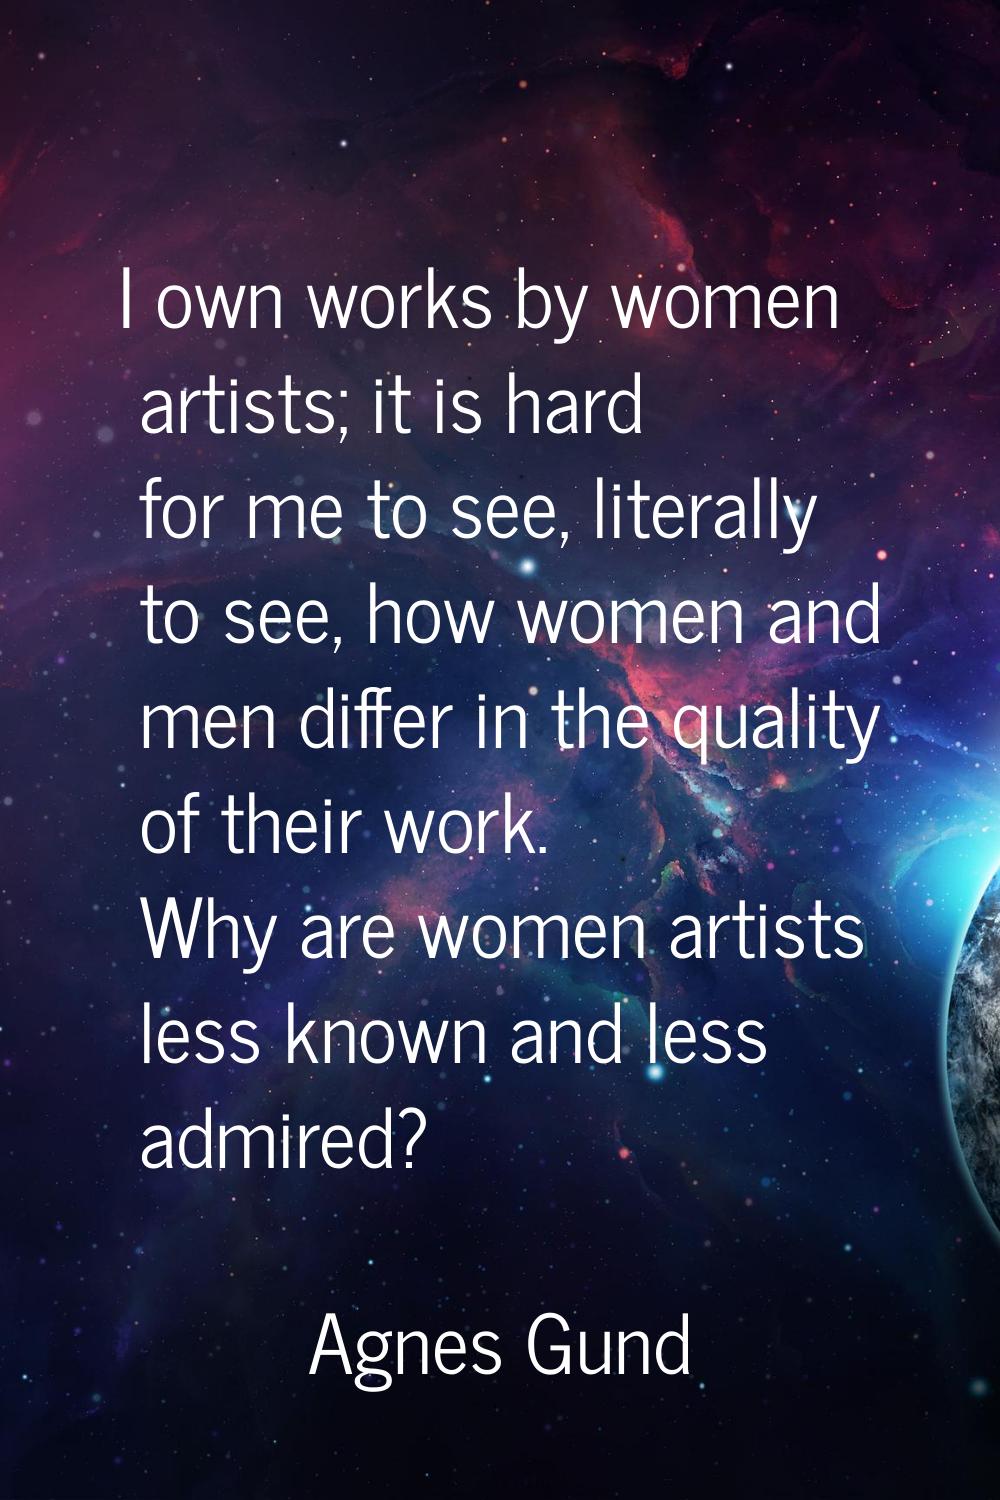 I own works by women artists; it is hard for me to see, literally to see, how women and men differ 